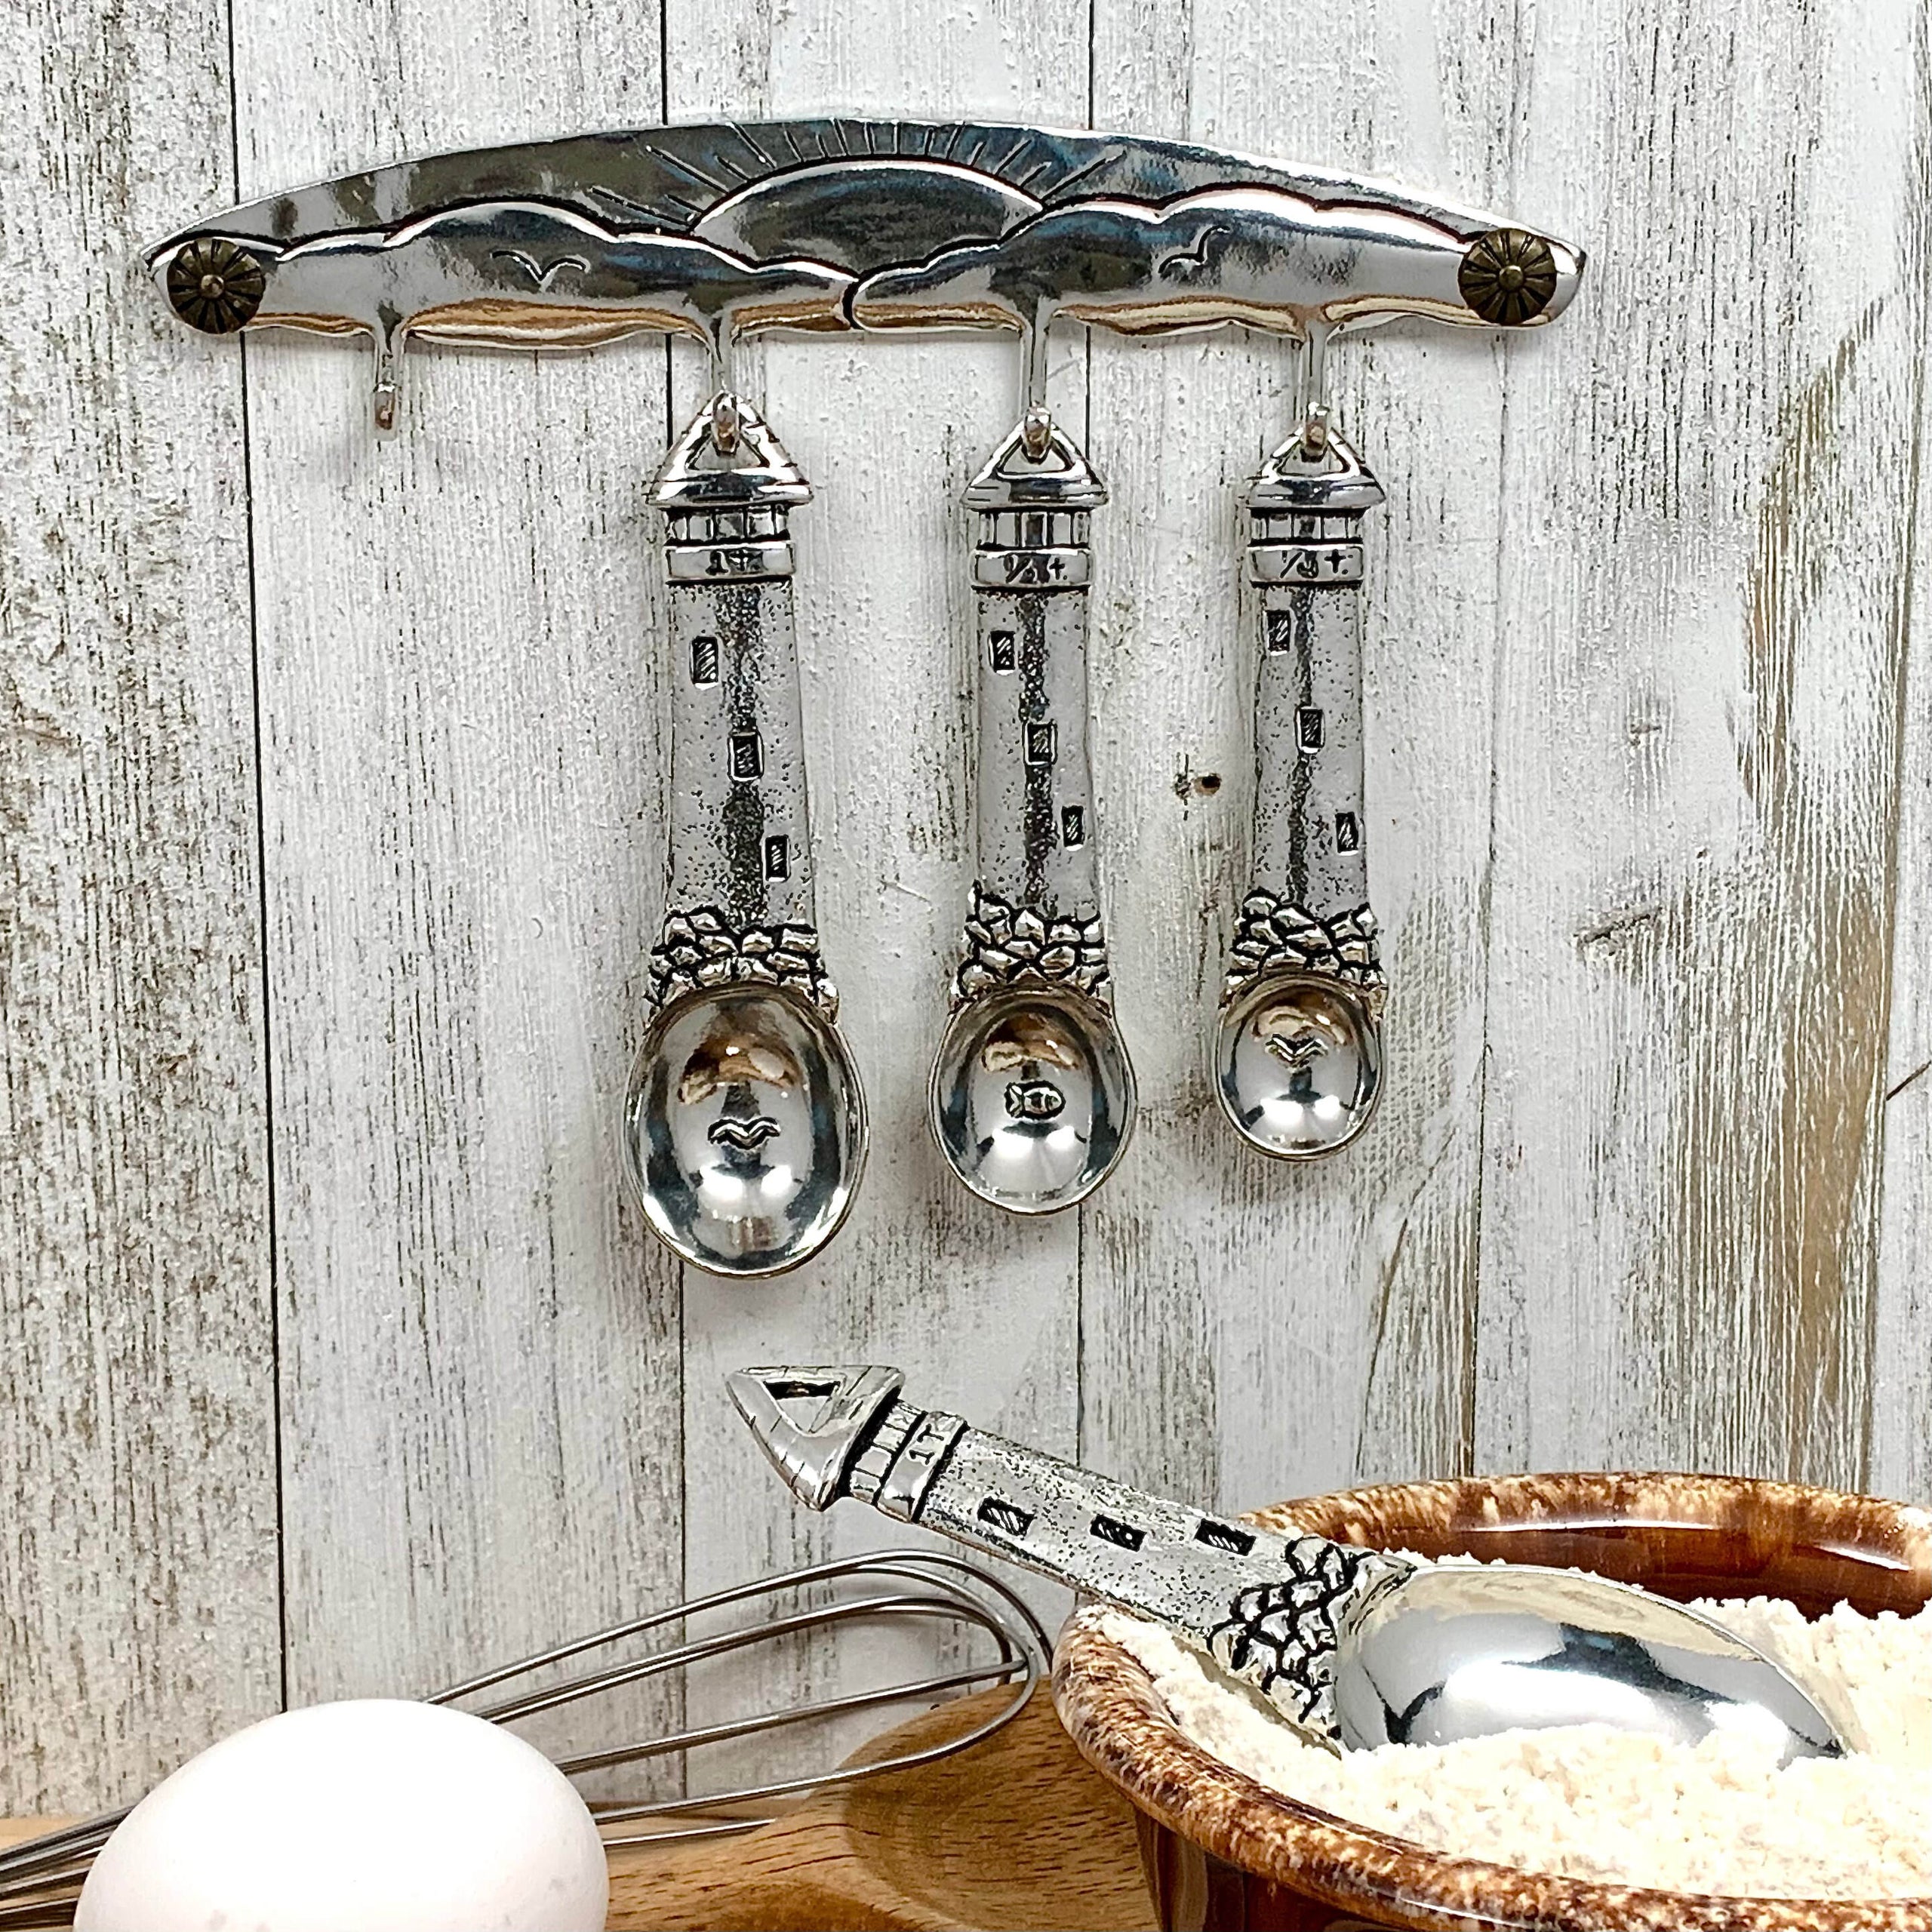 Lighthouse Measuring Spoons Set Pewter